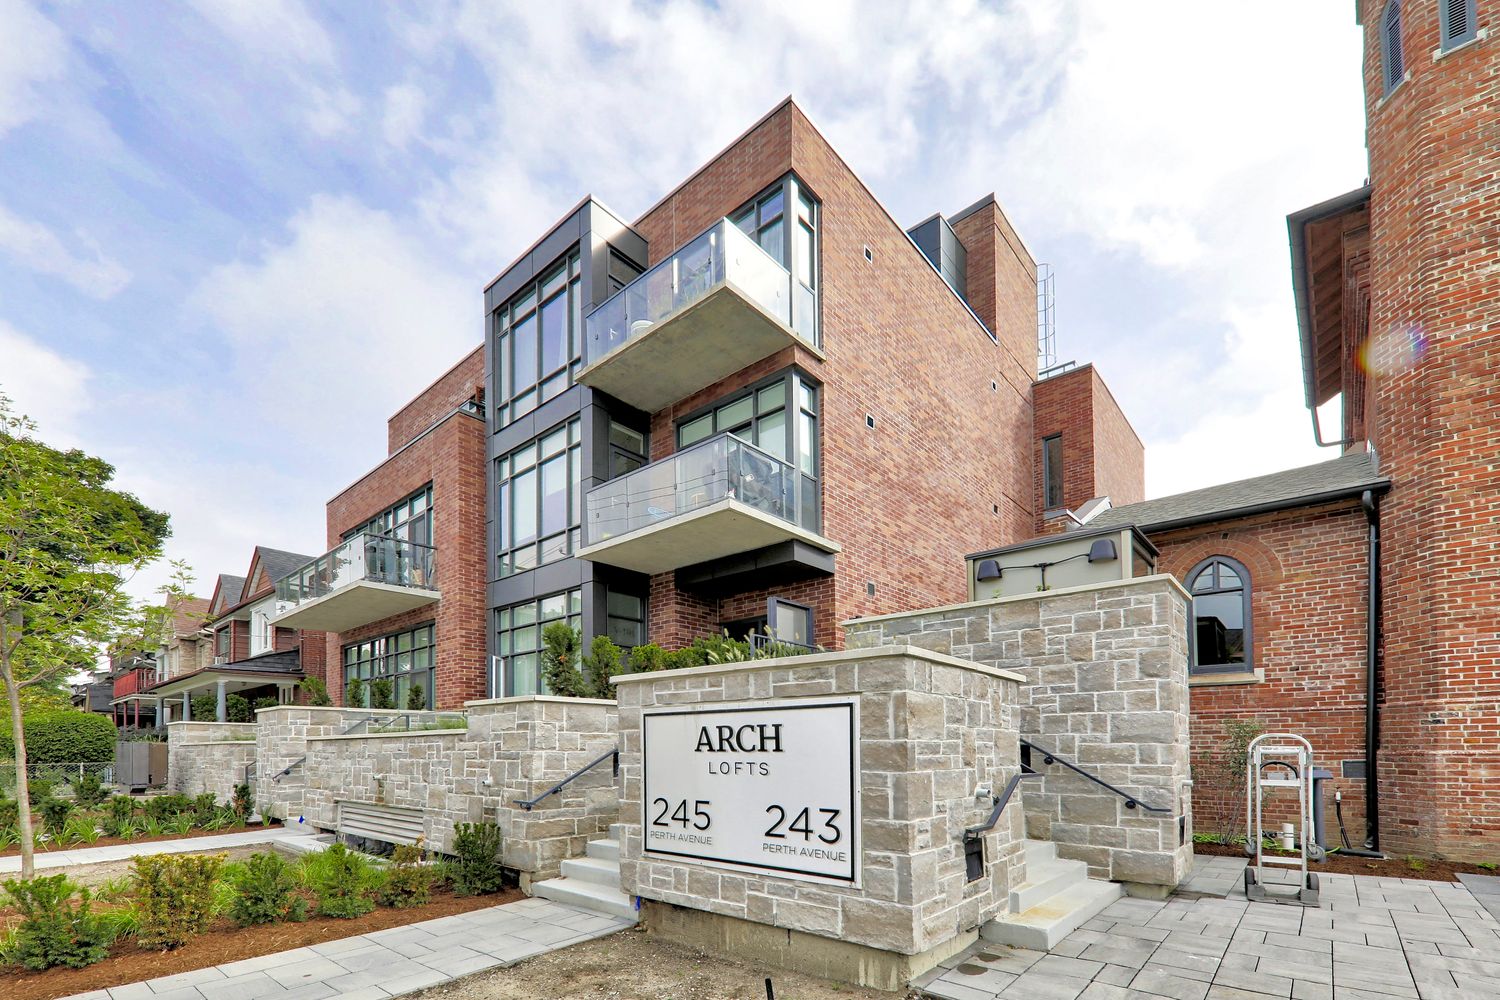 245 Perth Avenue. Arch Lofts is located in  West End, Toronto - image #1 of 5